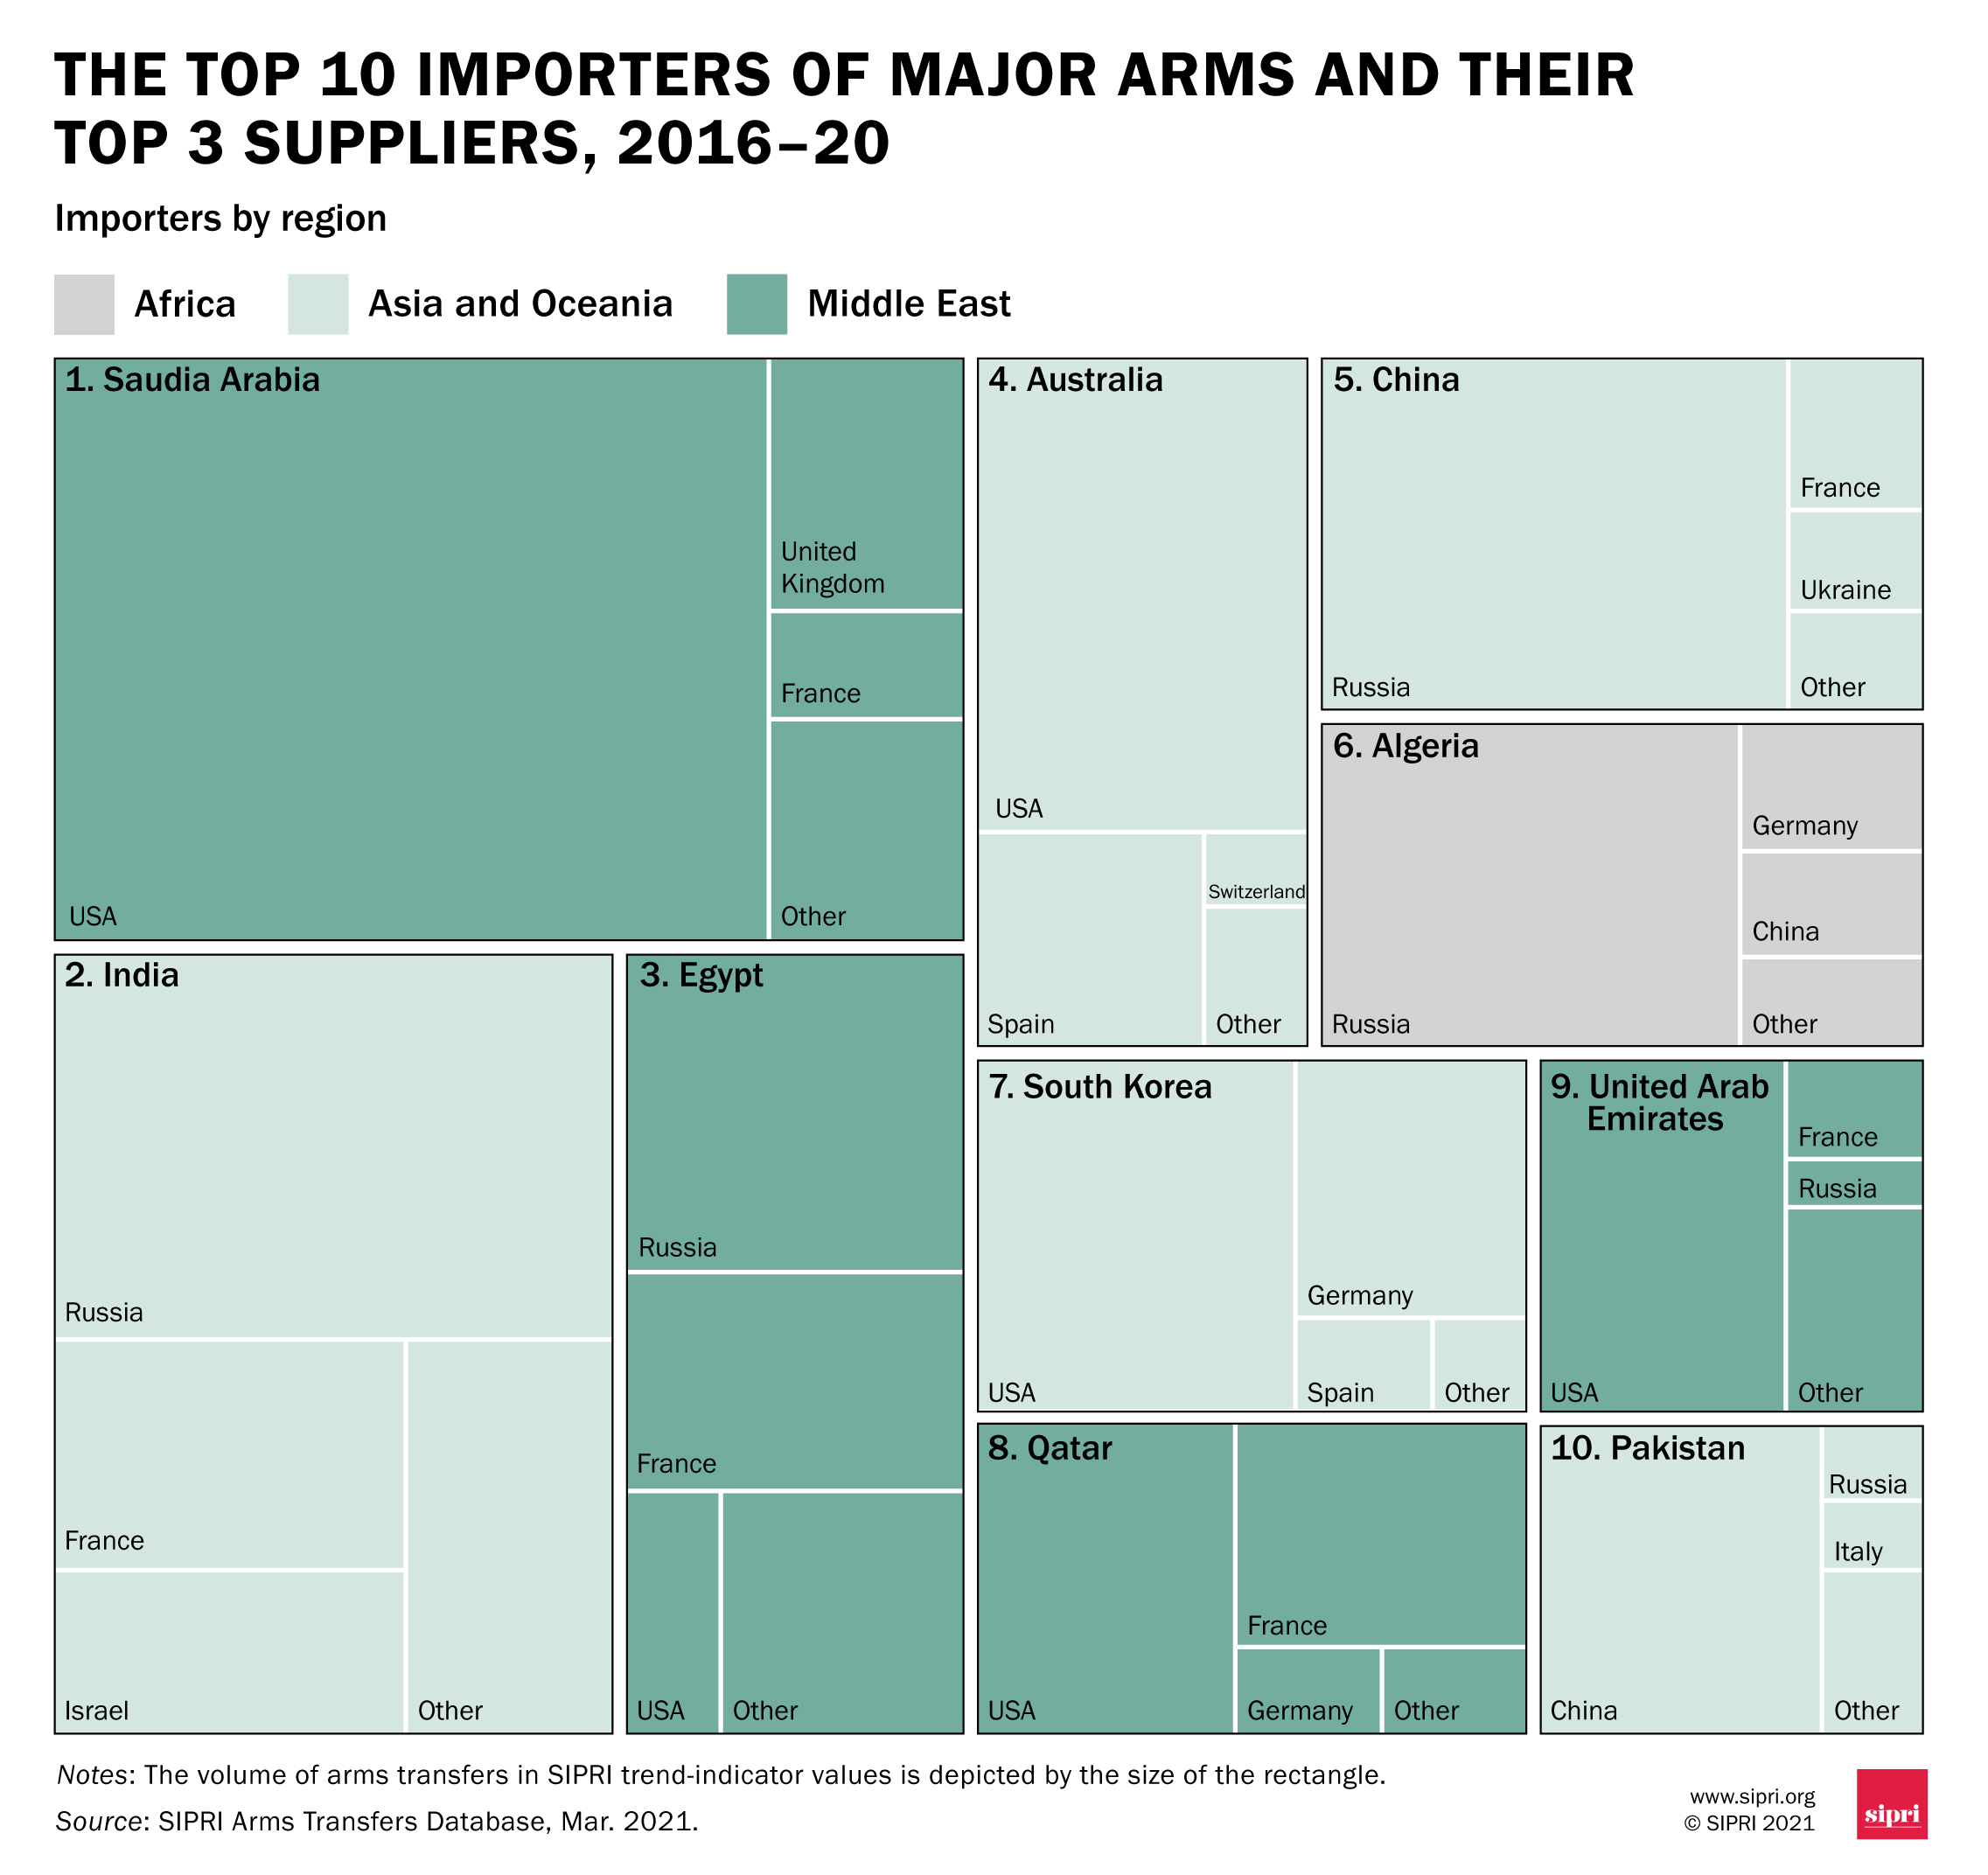 The United States continues to account for the vast majority of arms exports, both in the Middle East and in the world at large.